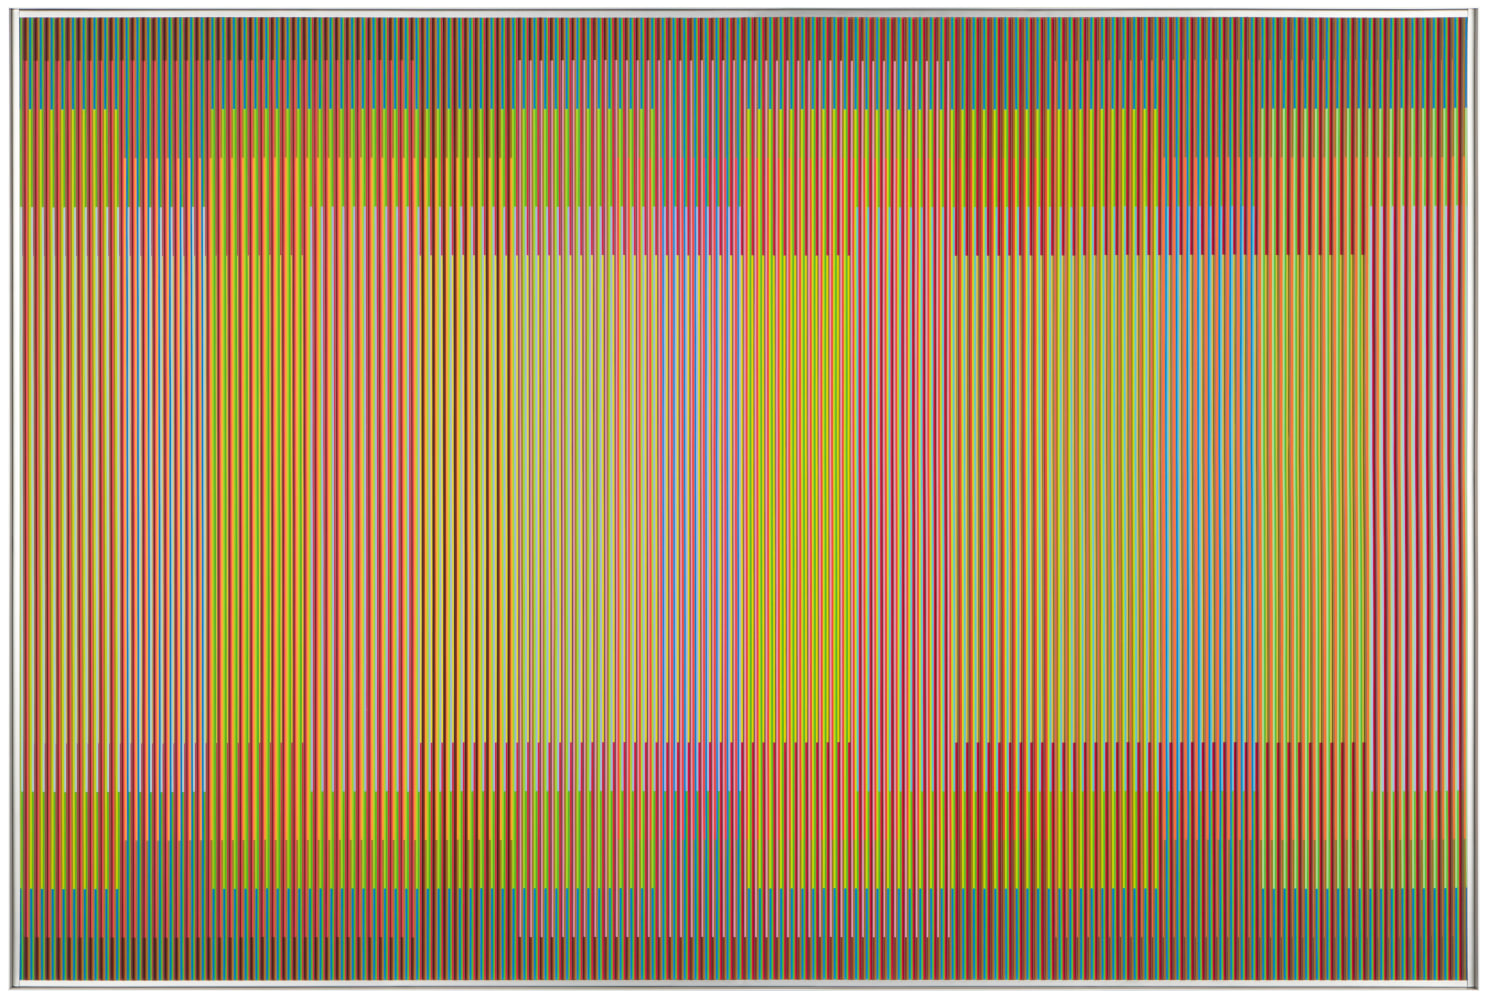 Physichromie no 1831, 2013     mixed media 39 3/8 x 59 inches;  100 x 150 centimeters LSFA# 13212